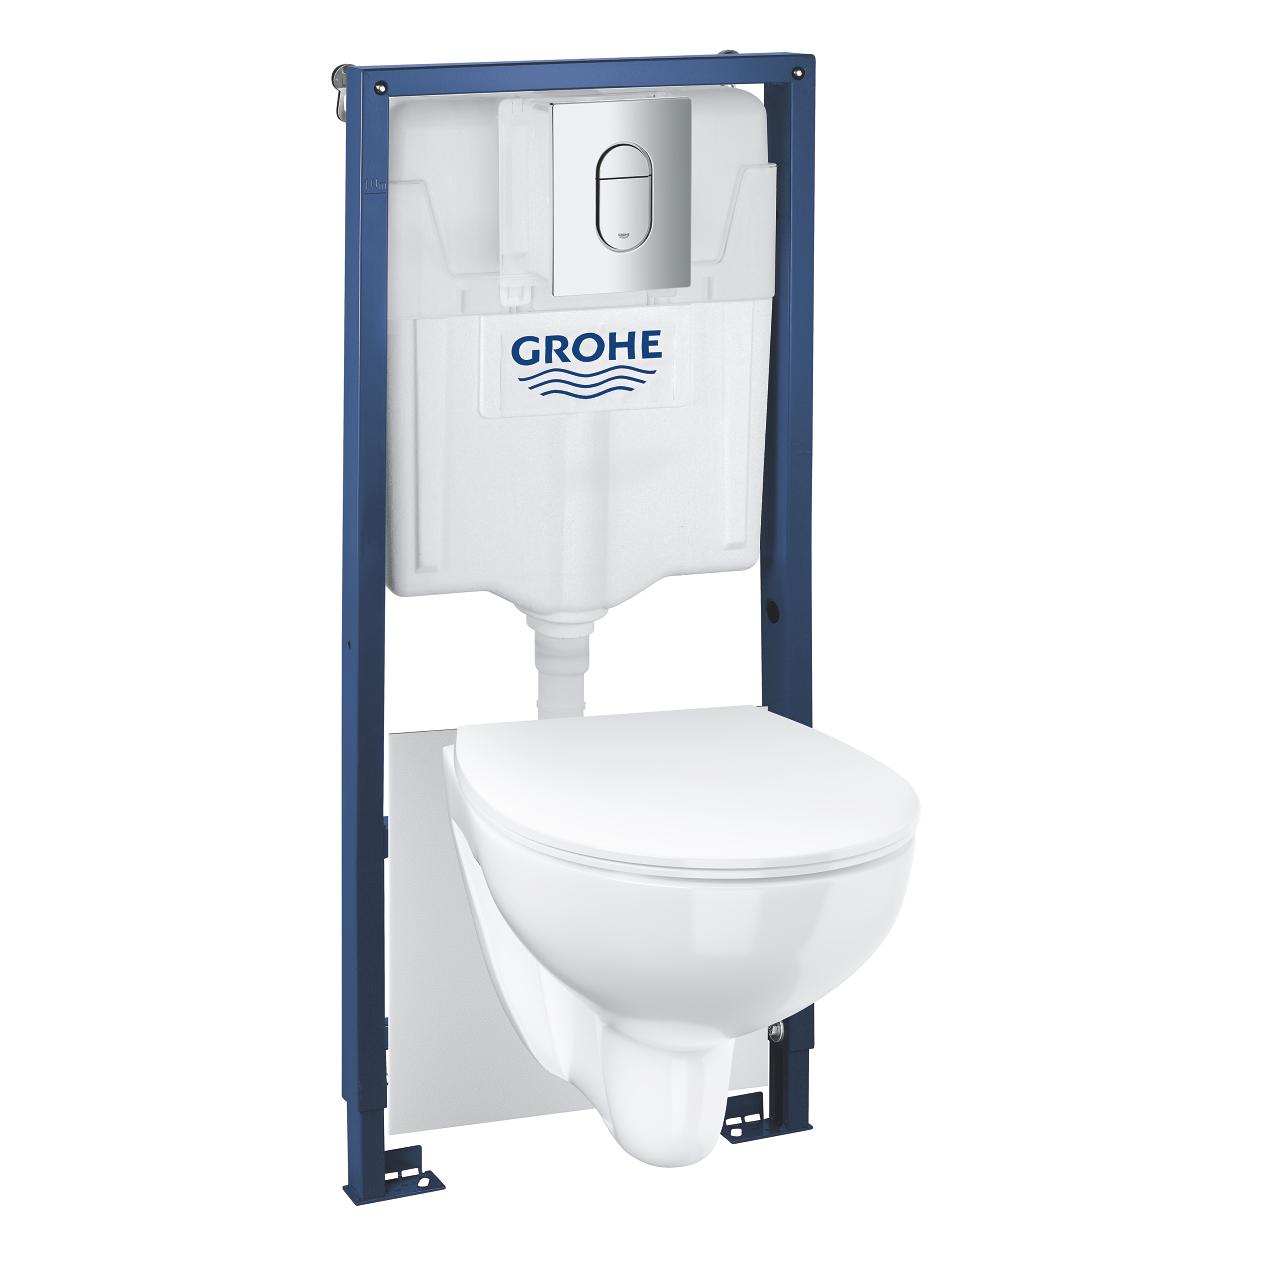 Grohe set - WC BauCeramic Rimless with seat SC, built-in frame h=1130mm, rinsing button Arena Cosmo chrome, brackets + gasket, 39902000 cover photo